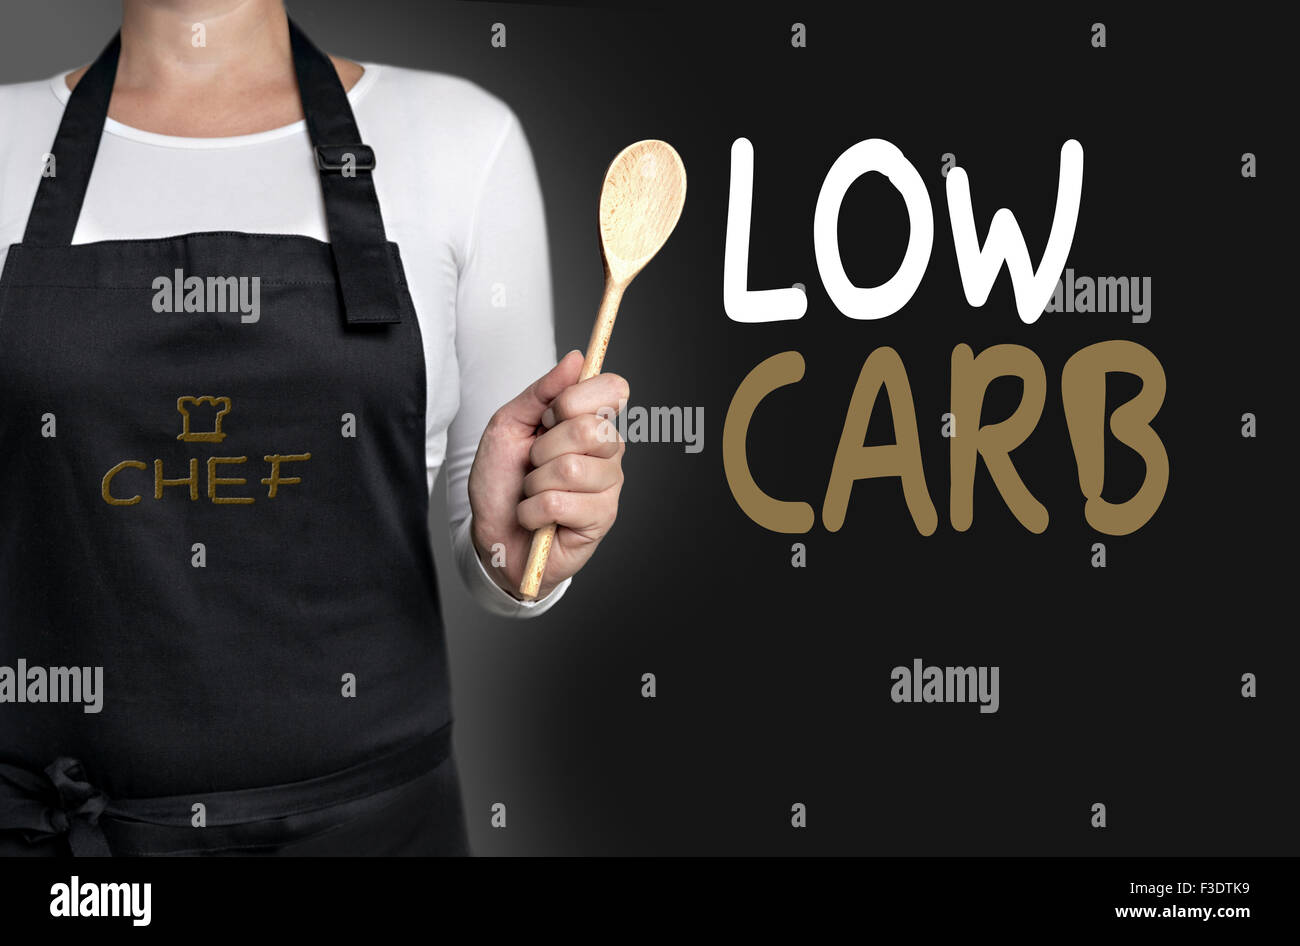 low carb cook holding wooden spoon background concept. Stock Photo